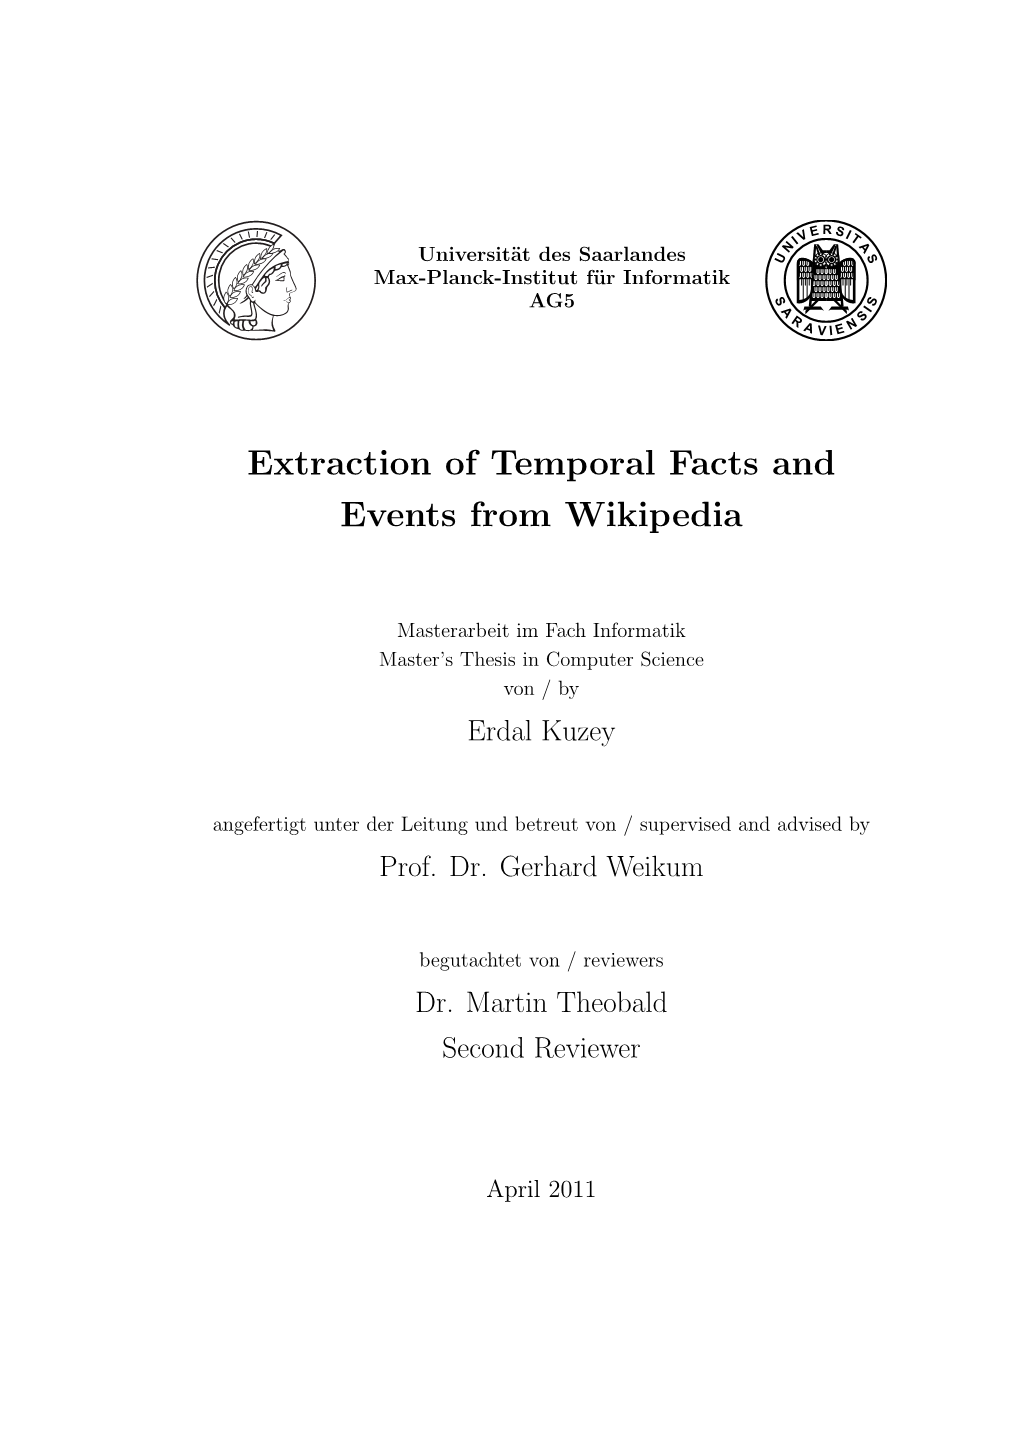 Extraction of Temporal Facts and Events from Wikipedia